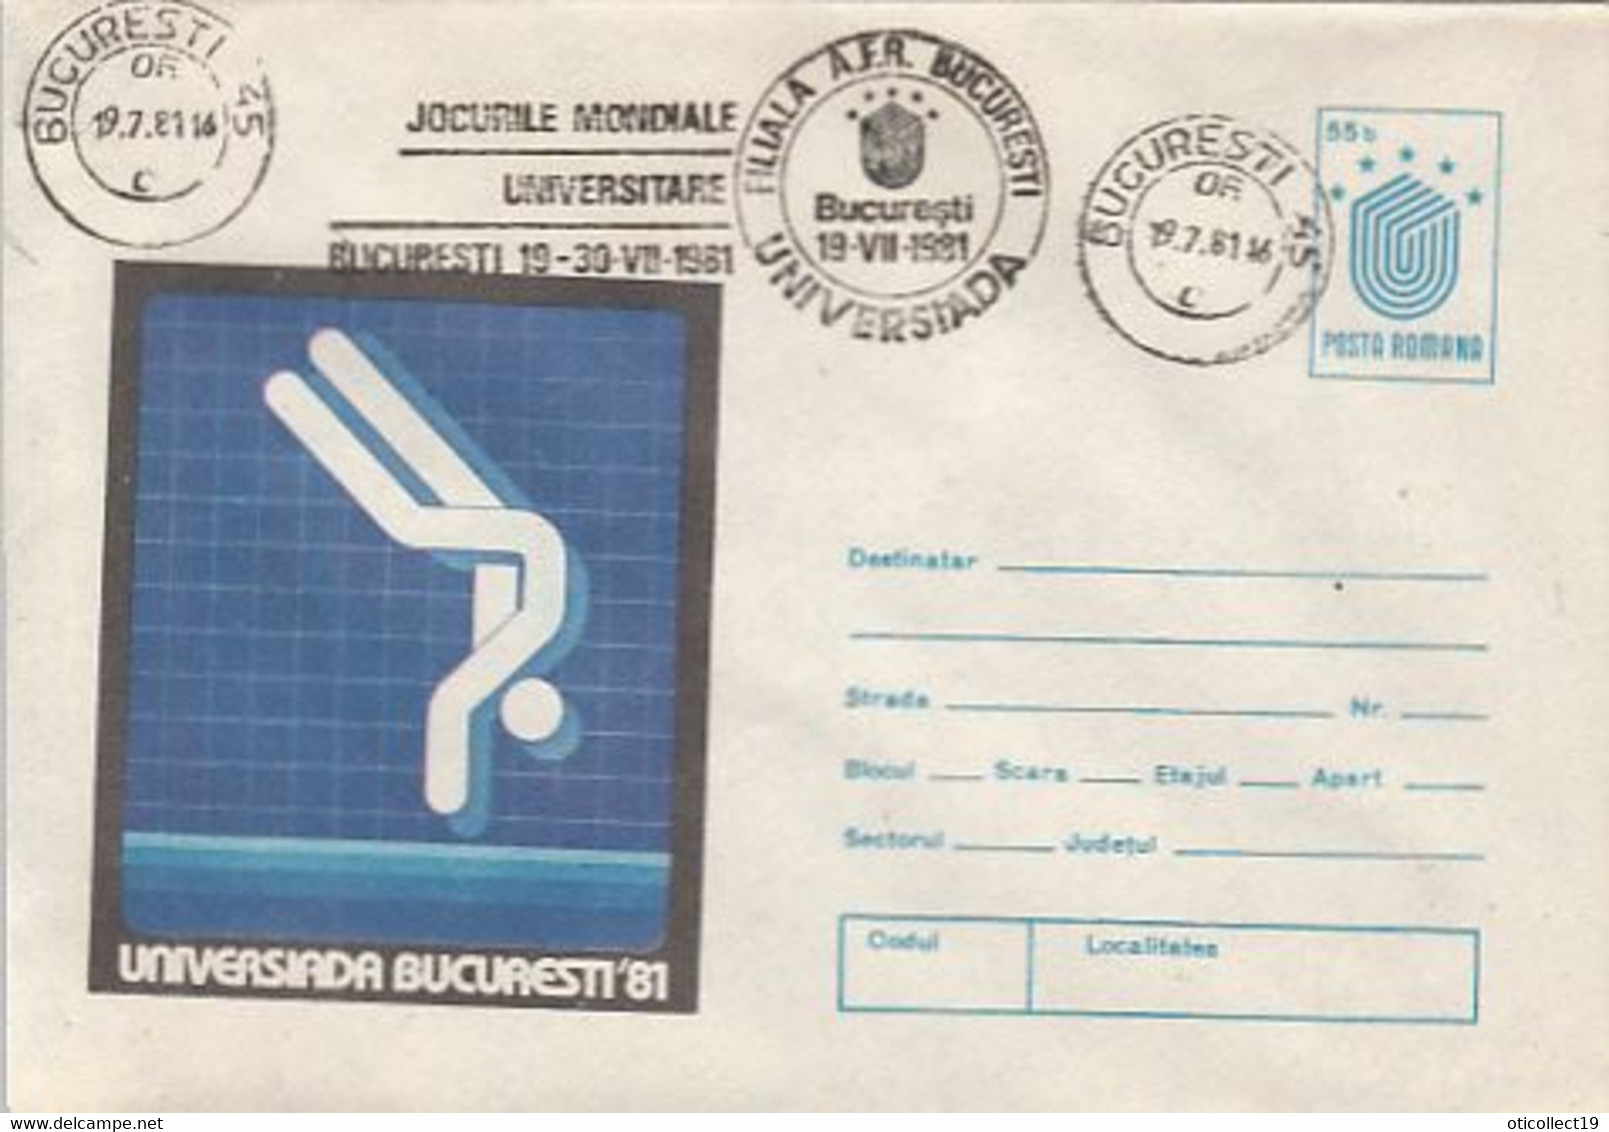 SPORTS, DIVING, WORLD UNIVERSITY GAMES, COVER STATIONERY, 1981, ROMANIA - Diving